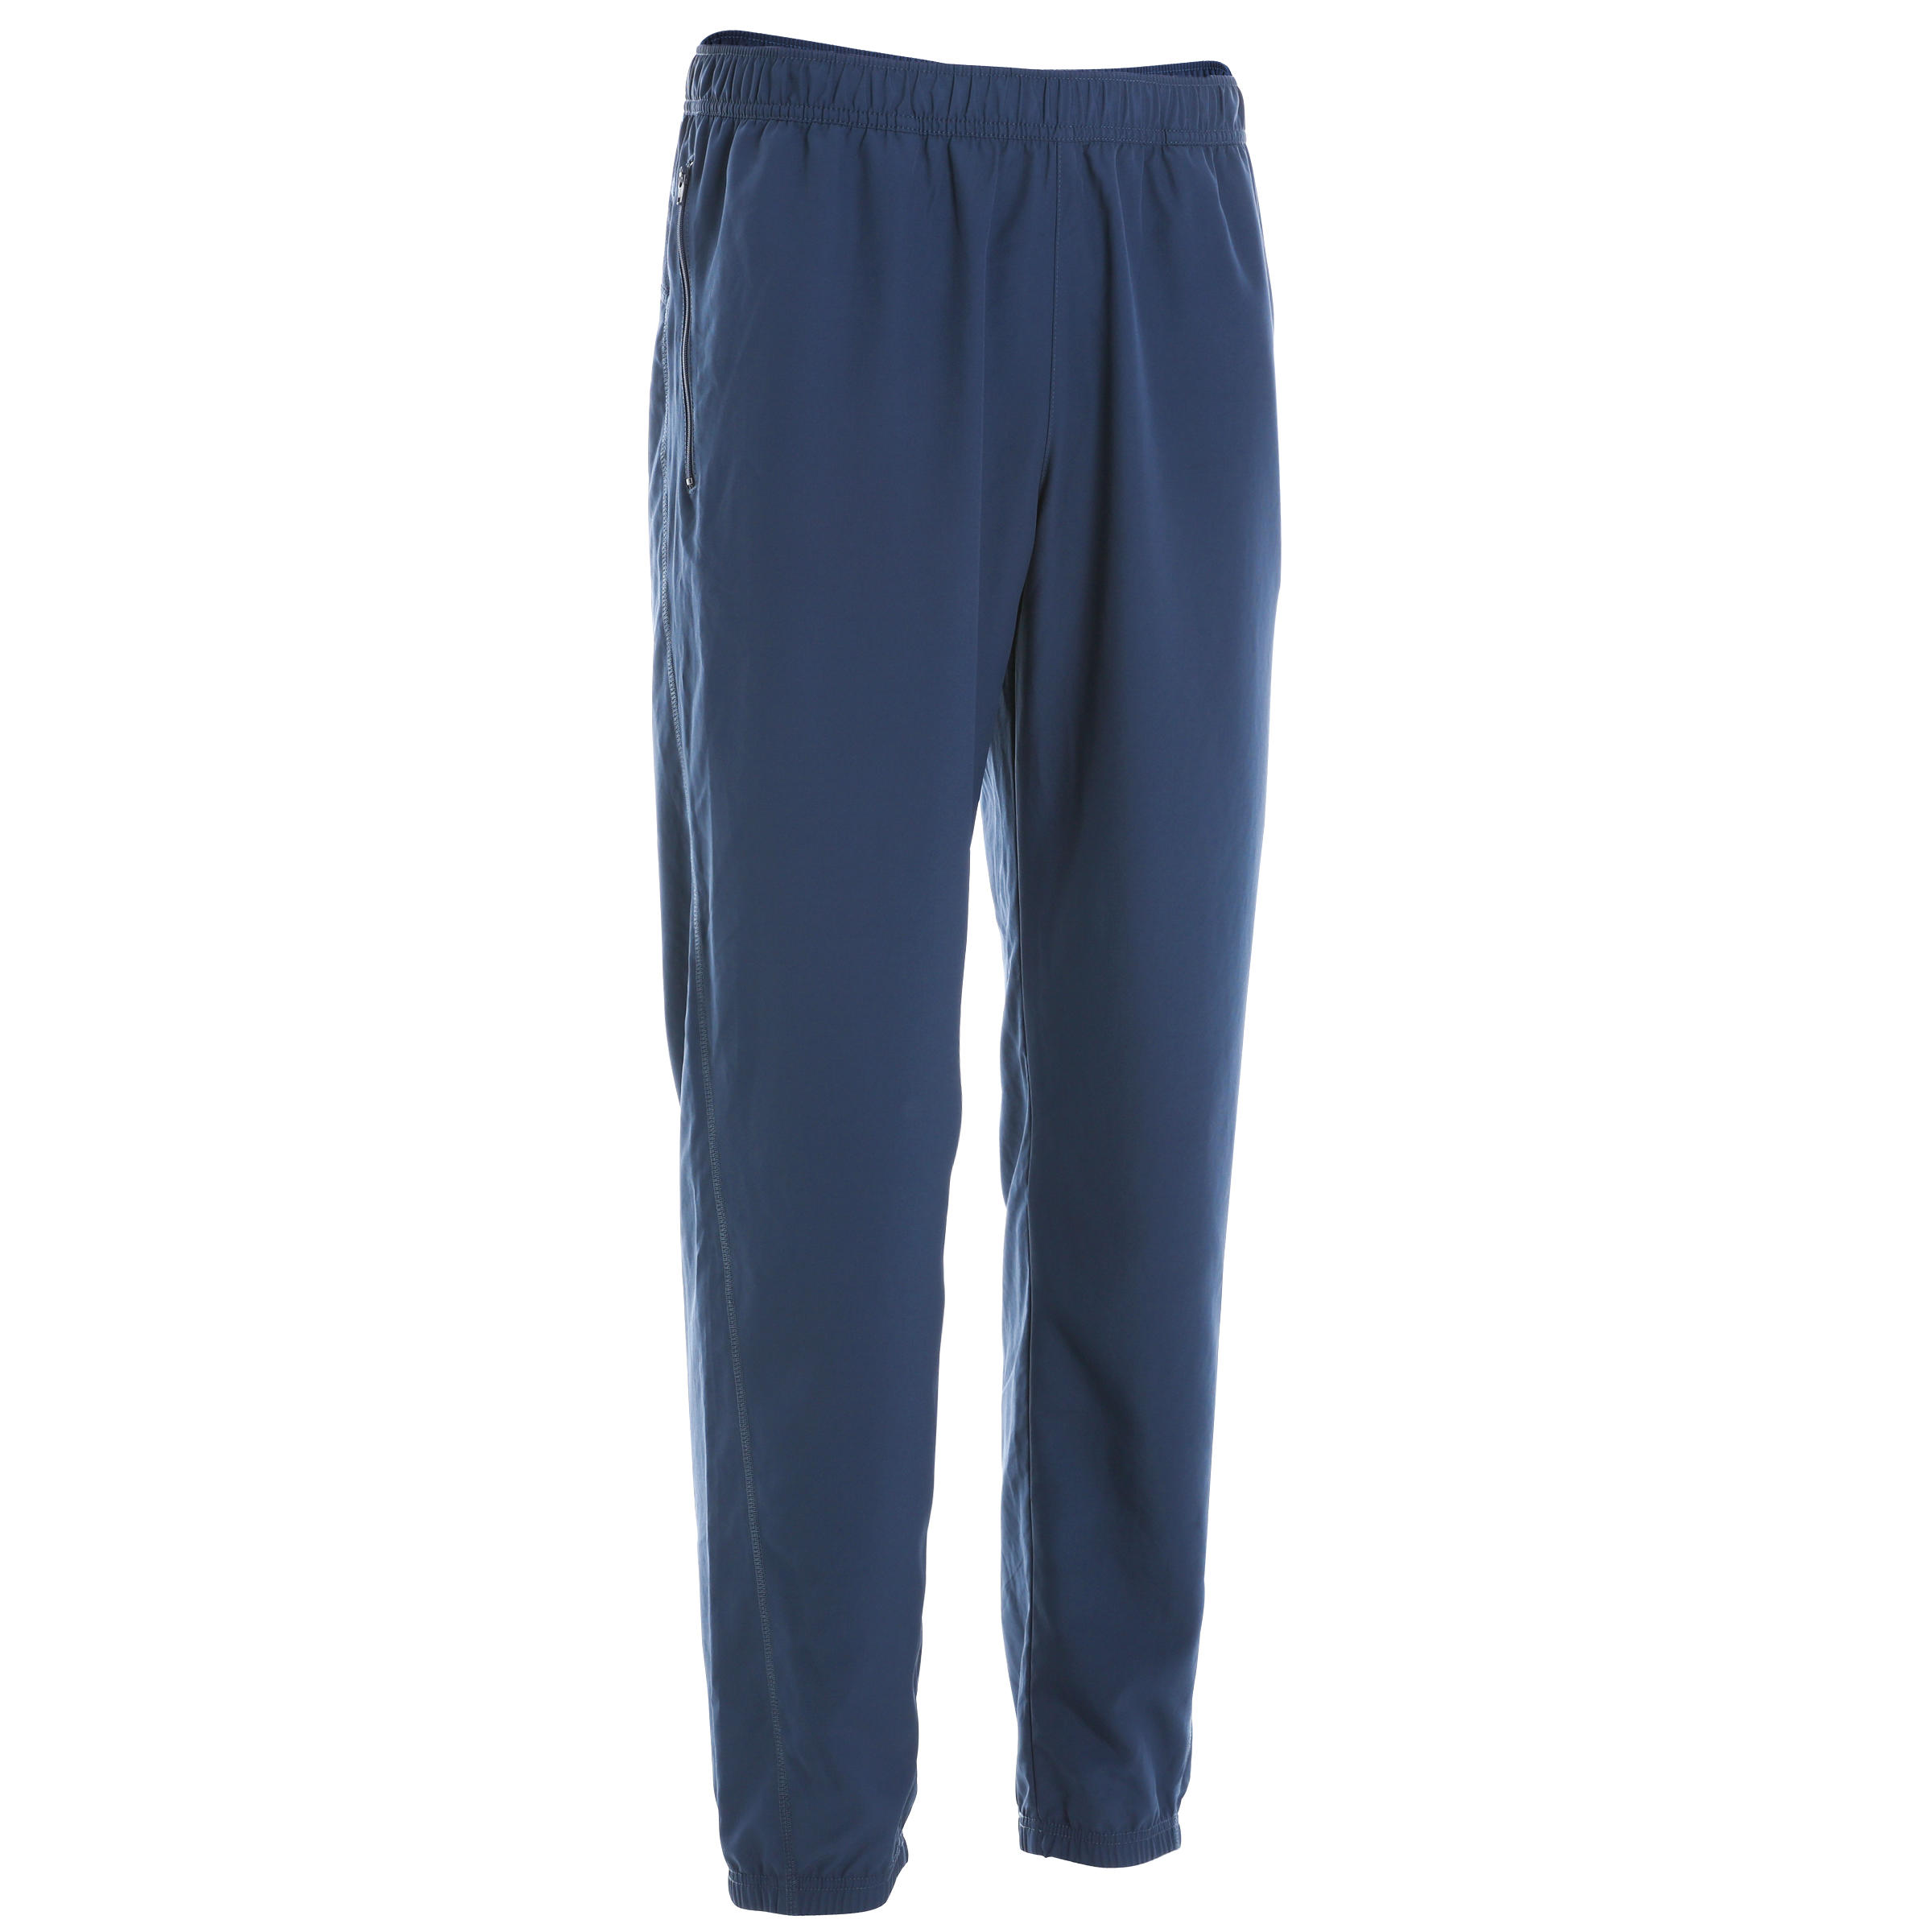 Decathlon Sports India - Track Pants, Straight fit, TSR 500, Adults,  Cricket & All Sports, Black Our team of Engineers and Designers have  developed this technical colored cricket trouser for regular training